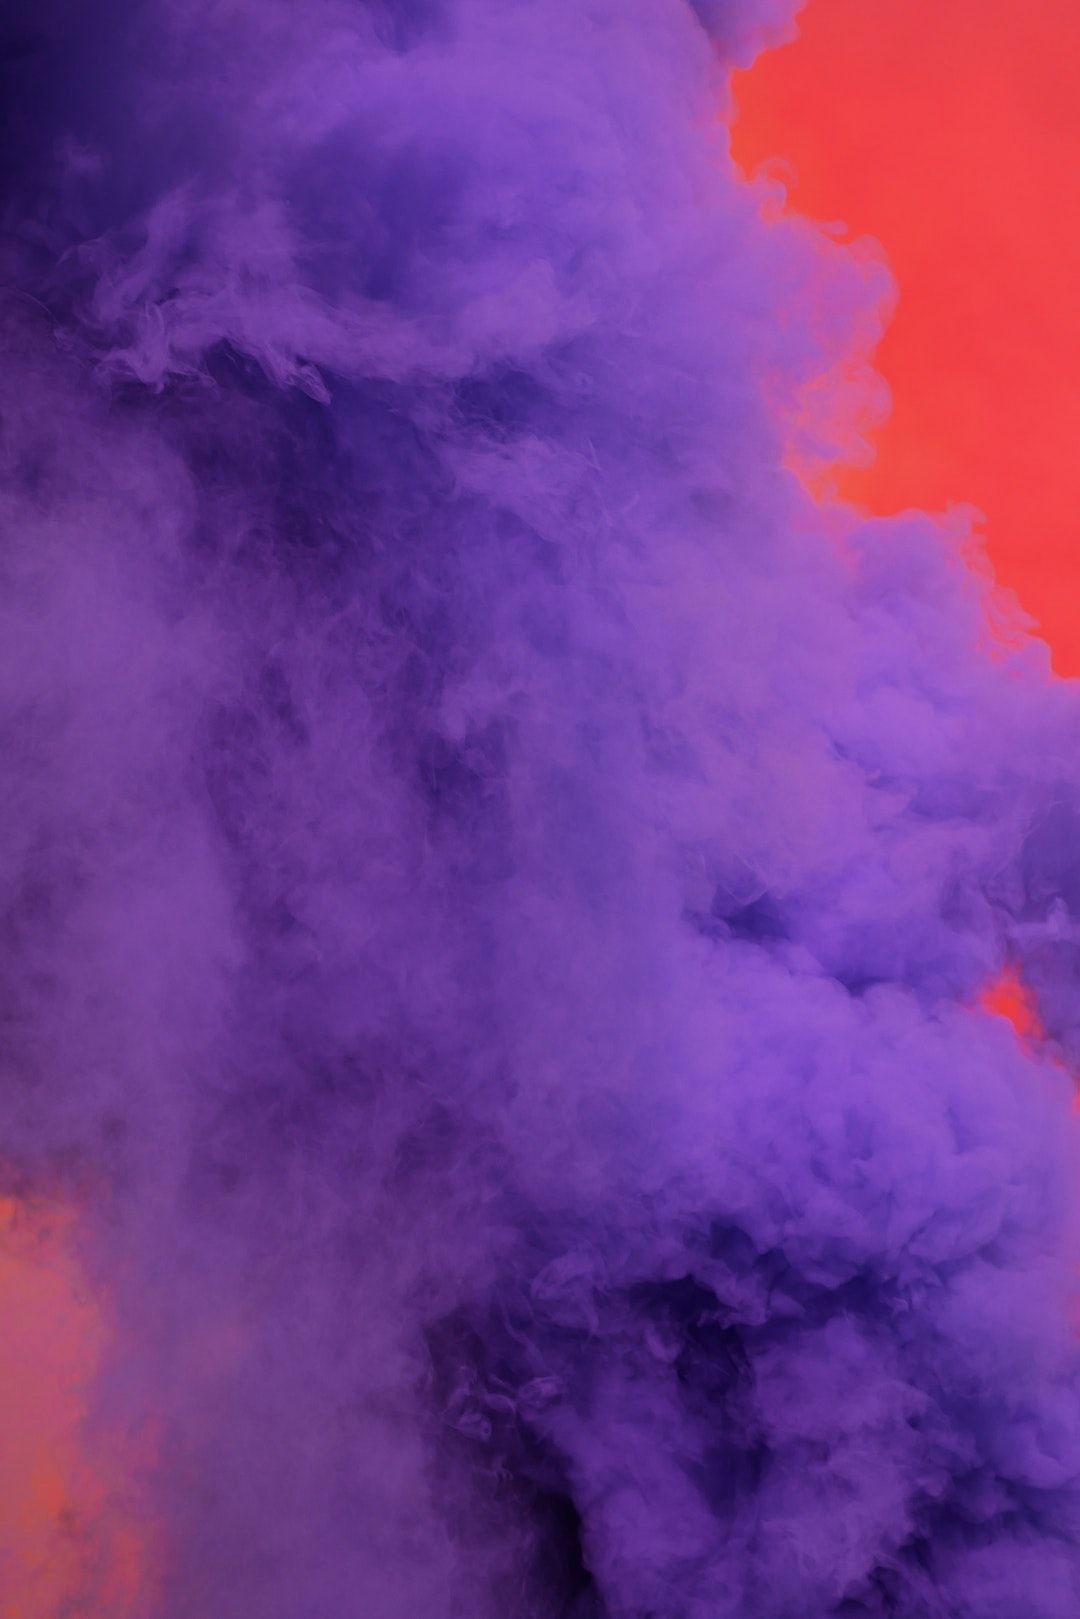 Download this free HD photo of smoke, smoke grenade, smoke bomb and colorful in Montreal, Canada by Camille Couv. Free textures, Smoke picture, Stock image free